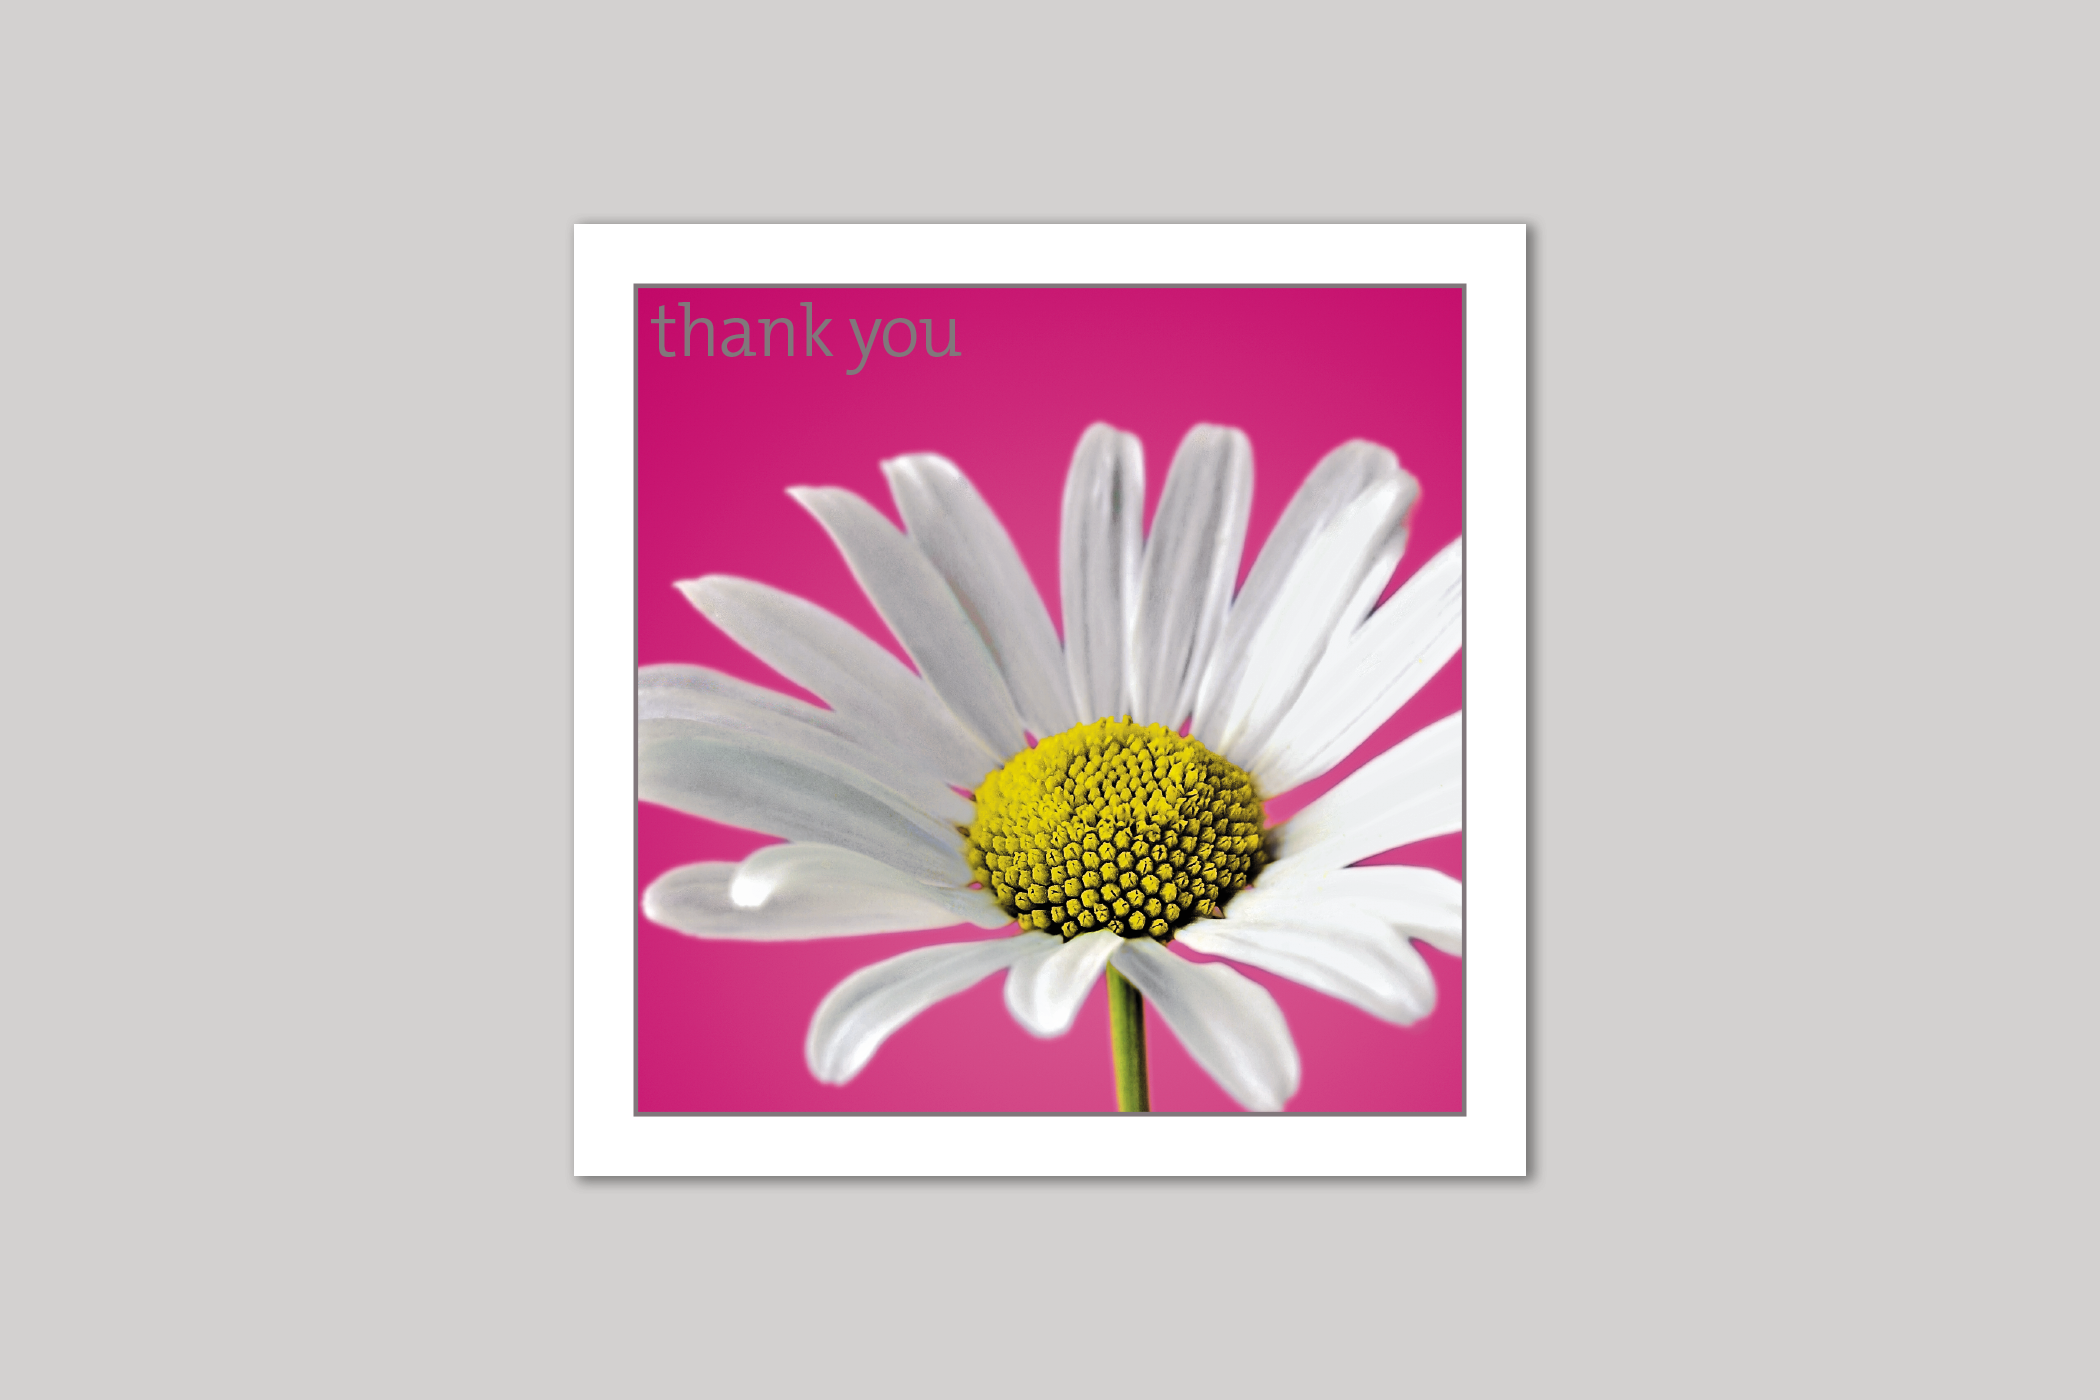 Daisy thank you card from Exposure Silver Edition range of greeting cards by Icon.